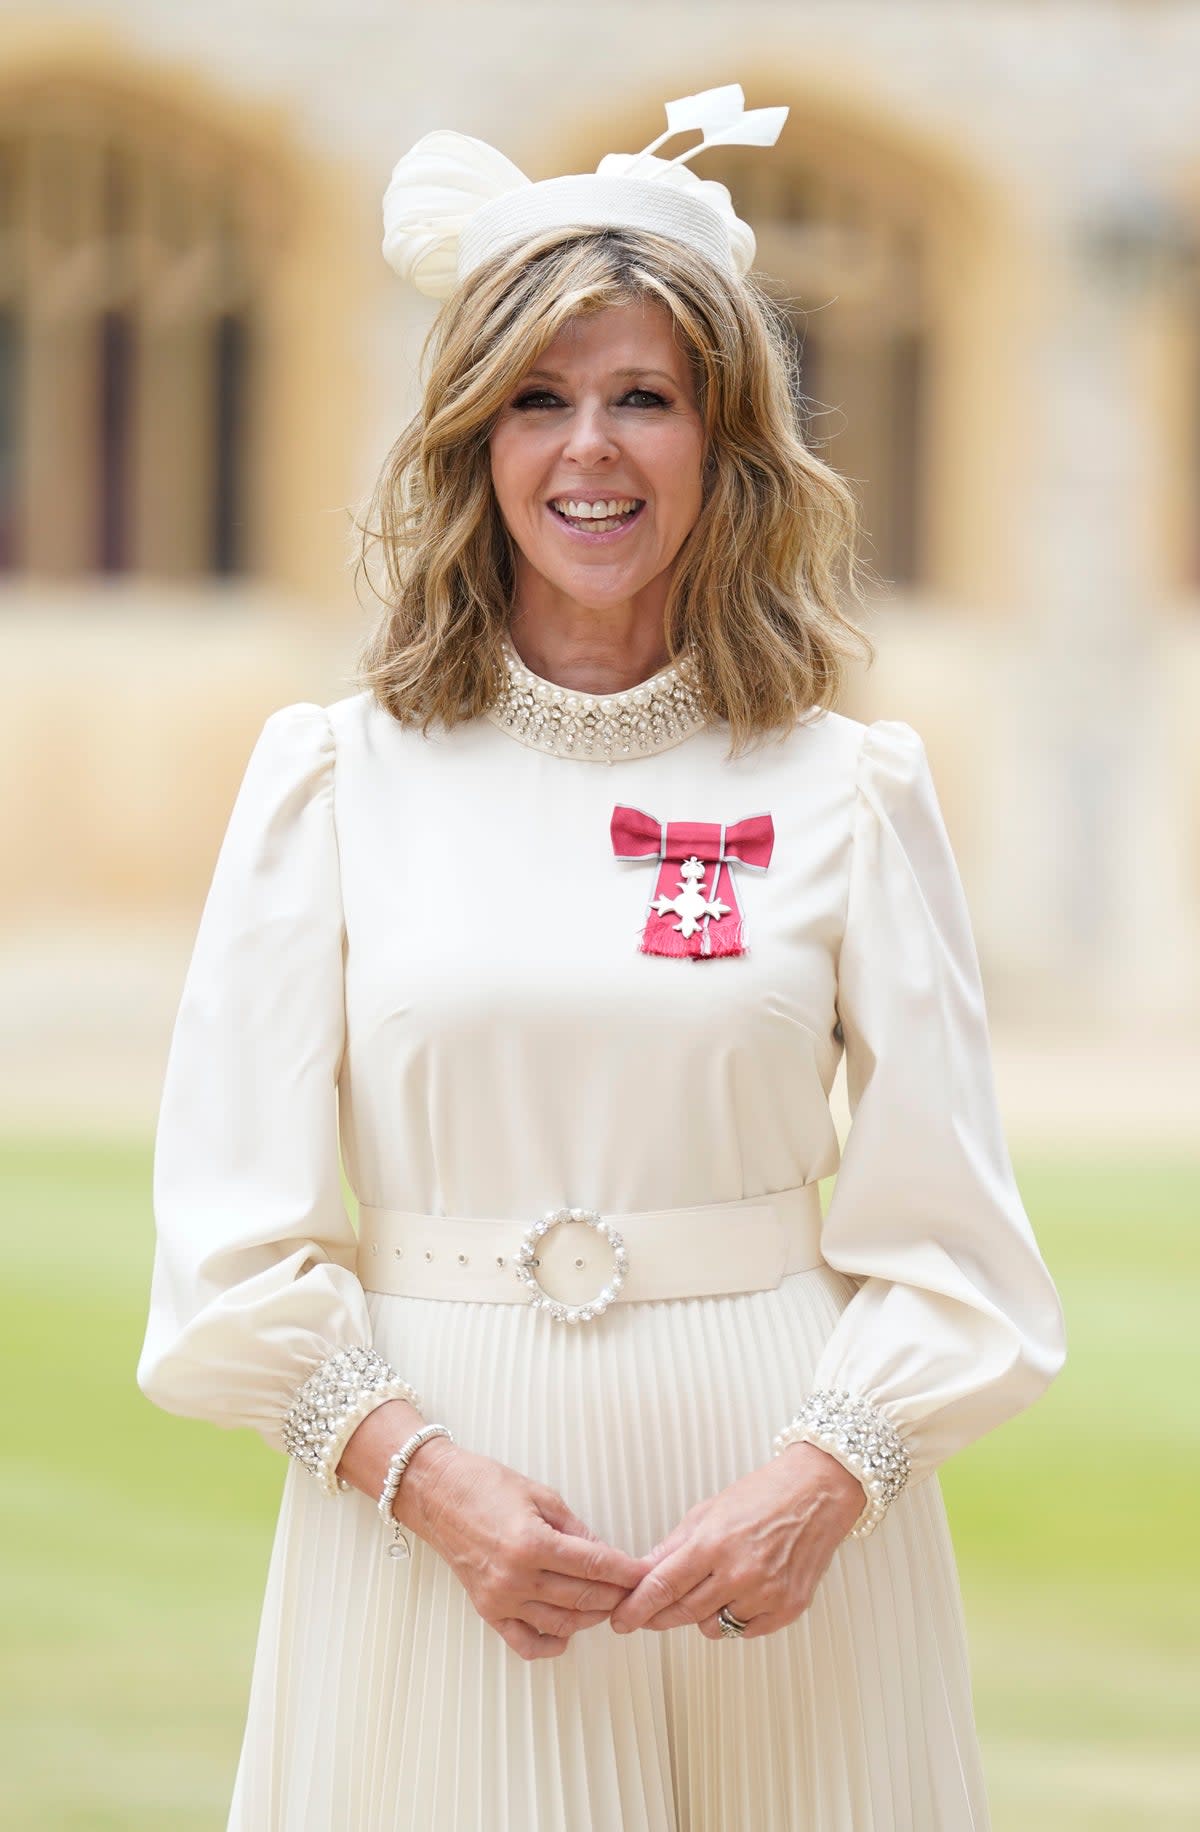 Kate Garraway after being made a Member of the Order of the British Empire for her services to broadcasting, journalism and charity (Getty Images)